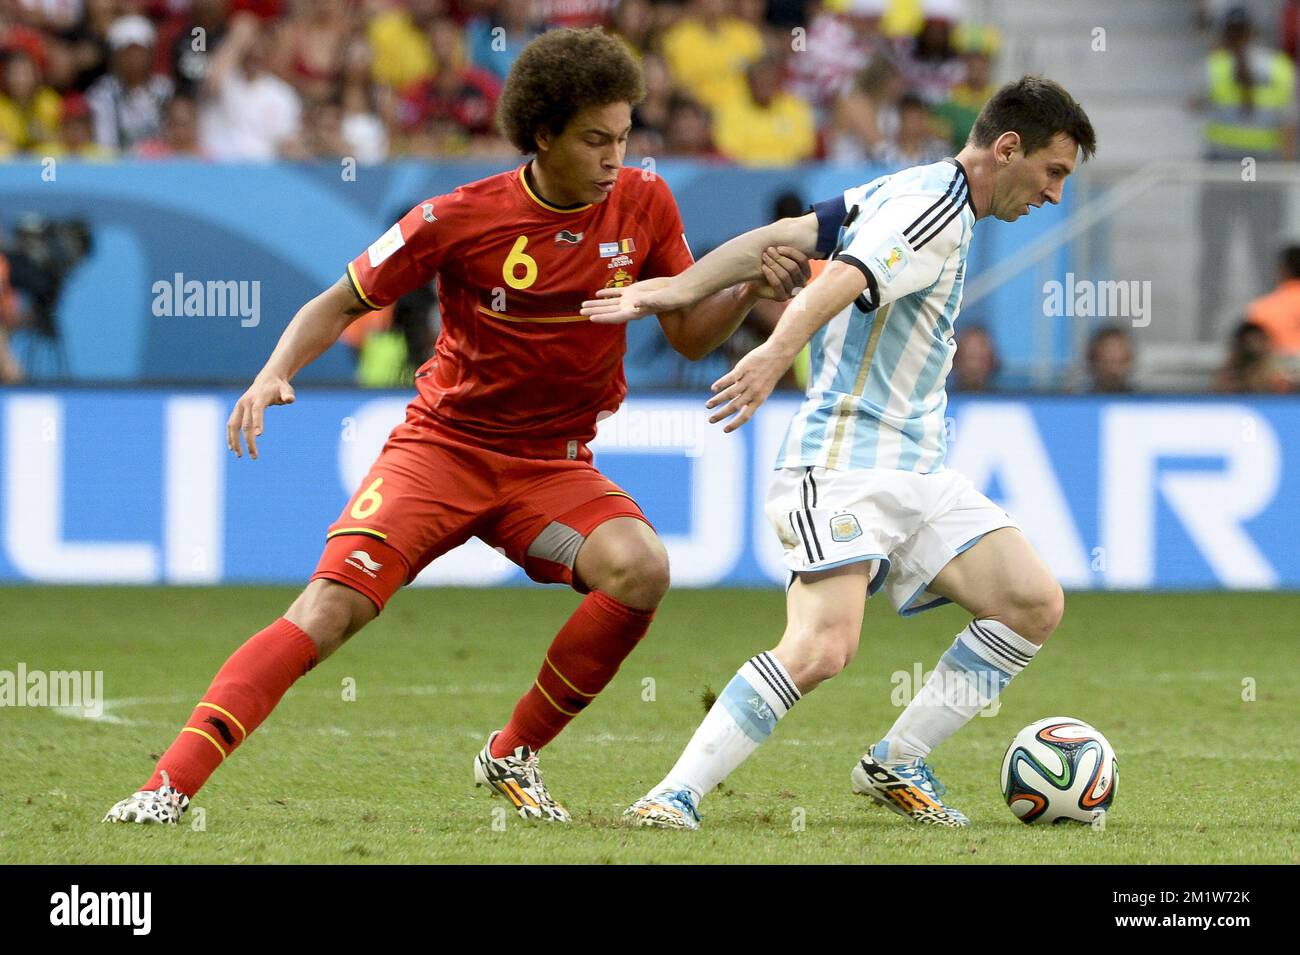 Argentina's Lionel Messi and Belgium's Axel Witsel fight for the ball during the quarter final match between Belgian national soccer team Red Devils and Argentina, in Estadio Nacional Mane Garrincha, in Brasilia, Brazil, during the 2014 FIFA World Cup, Saturday 05 July 2014.  Stock Photo